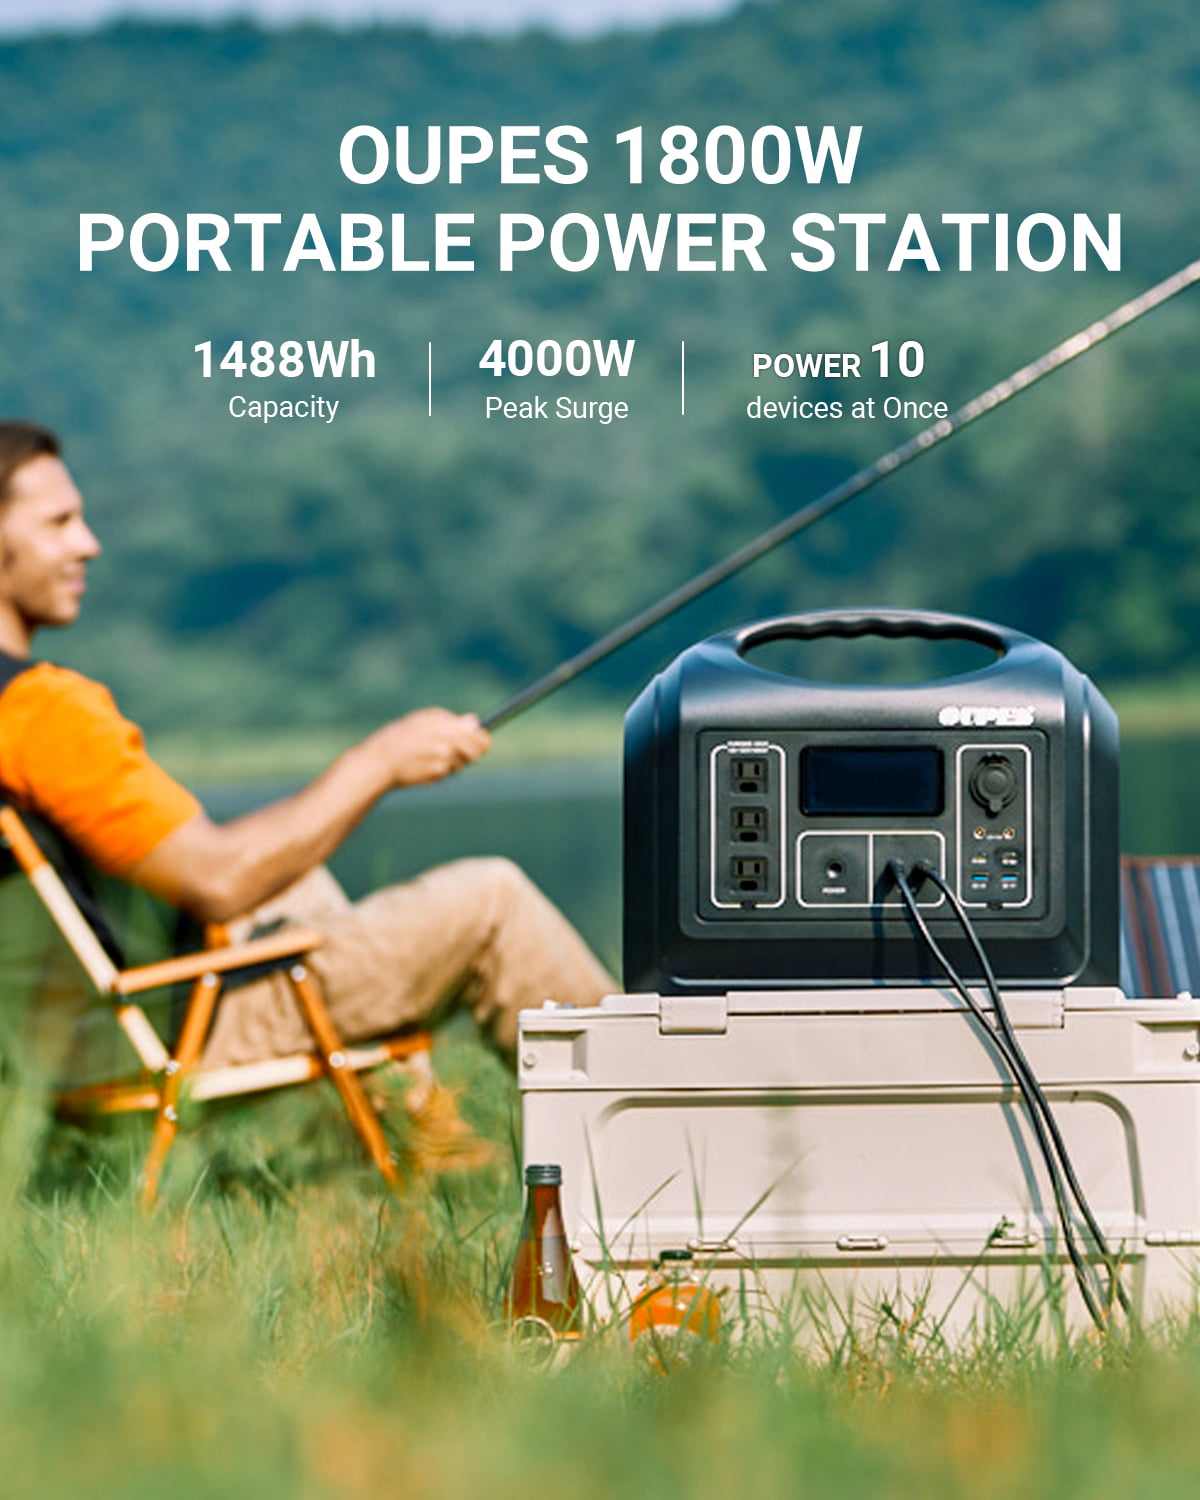 OUPES 1800W Portable Power Station, Generator (4000W Battery 4000+ Backup 1488Wh AC Peak), Outlets with Use, (465000 Solar 3 Cycle Home LiFePO4 for mAh) Camping